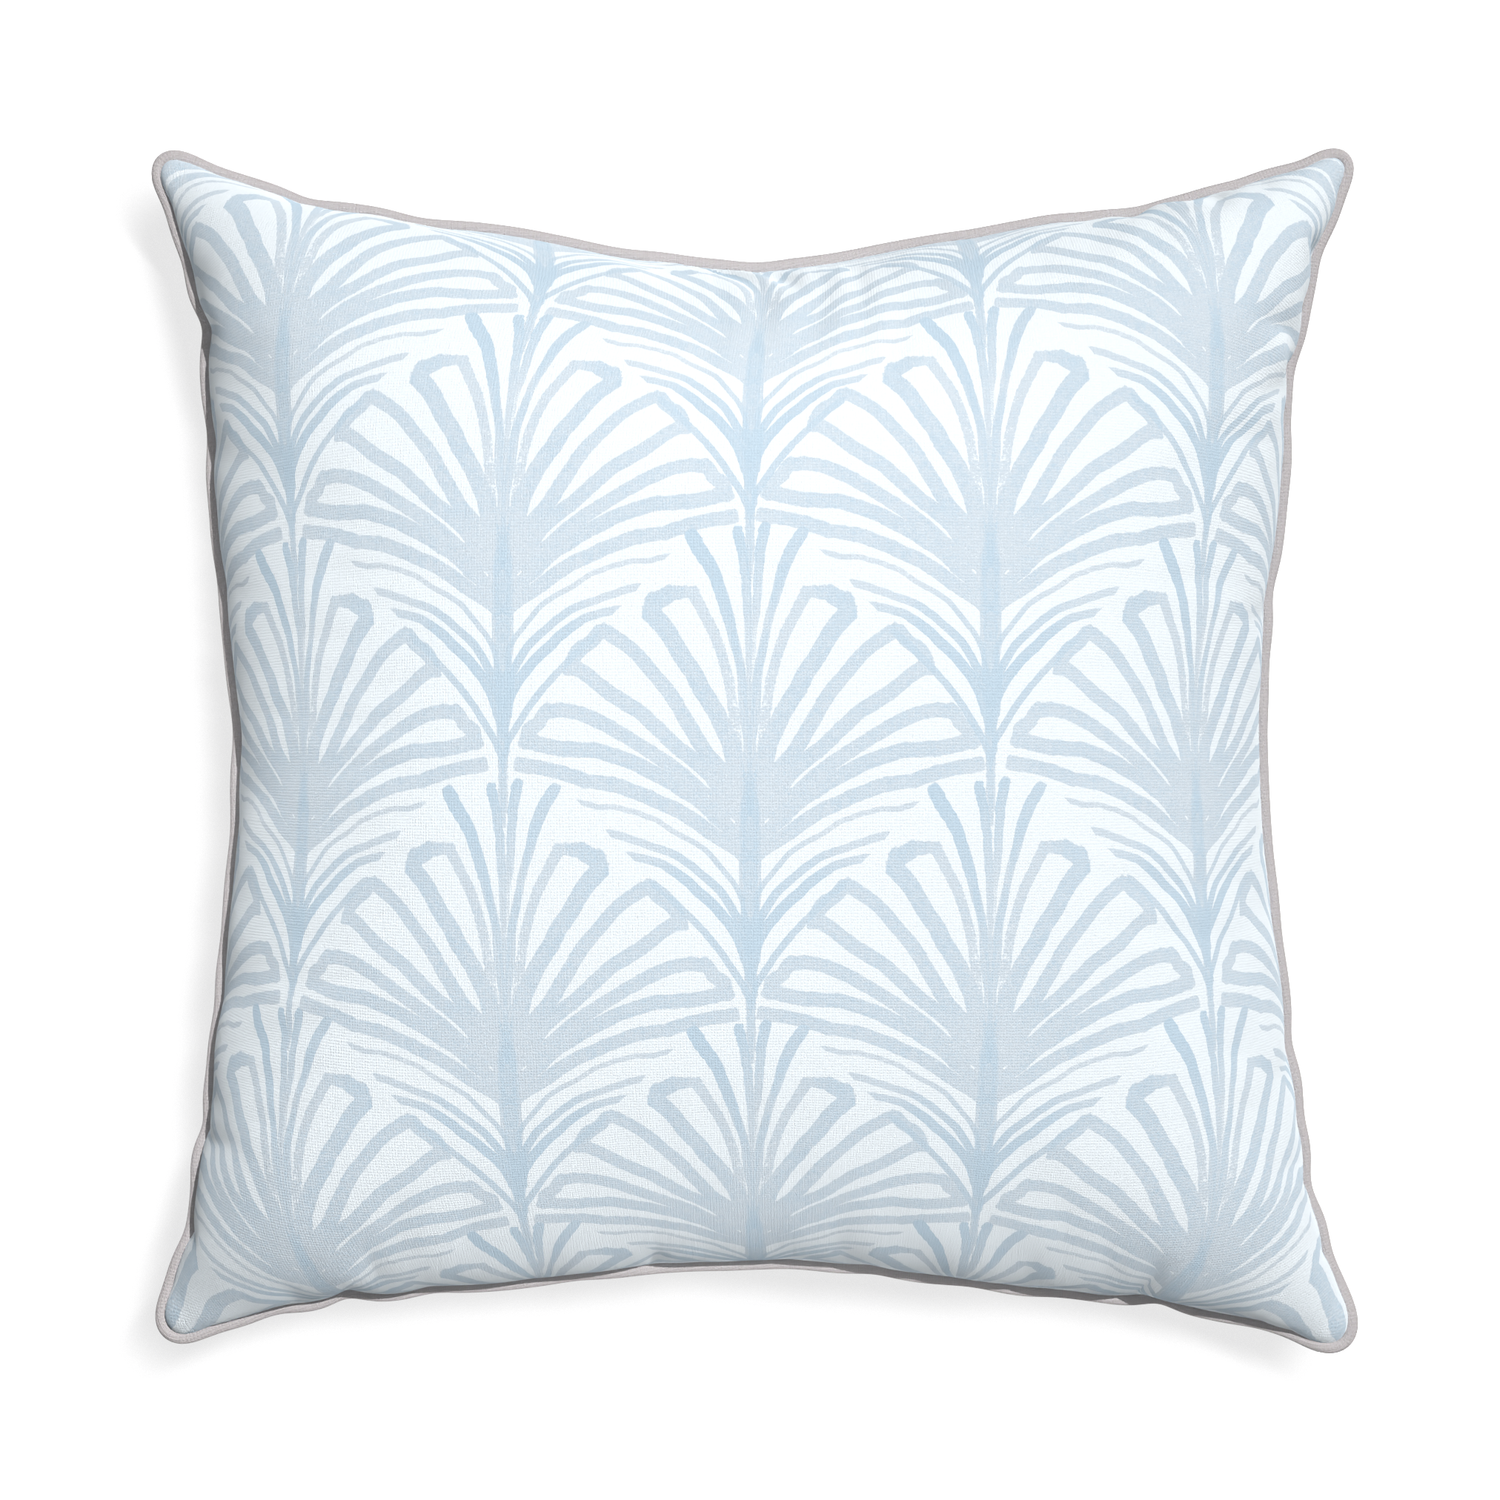 Euro-sham suzy sky custom pillow with pebble piping on white background